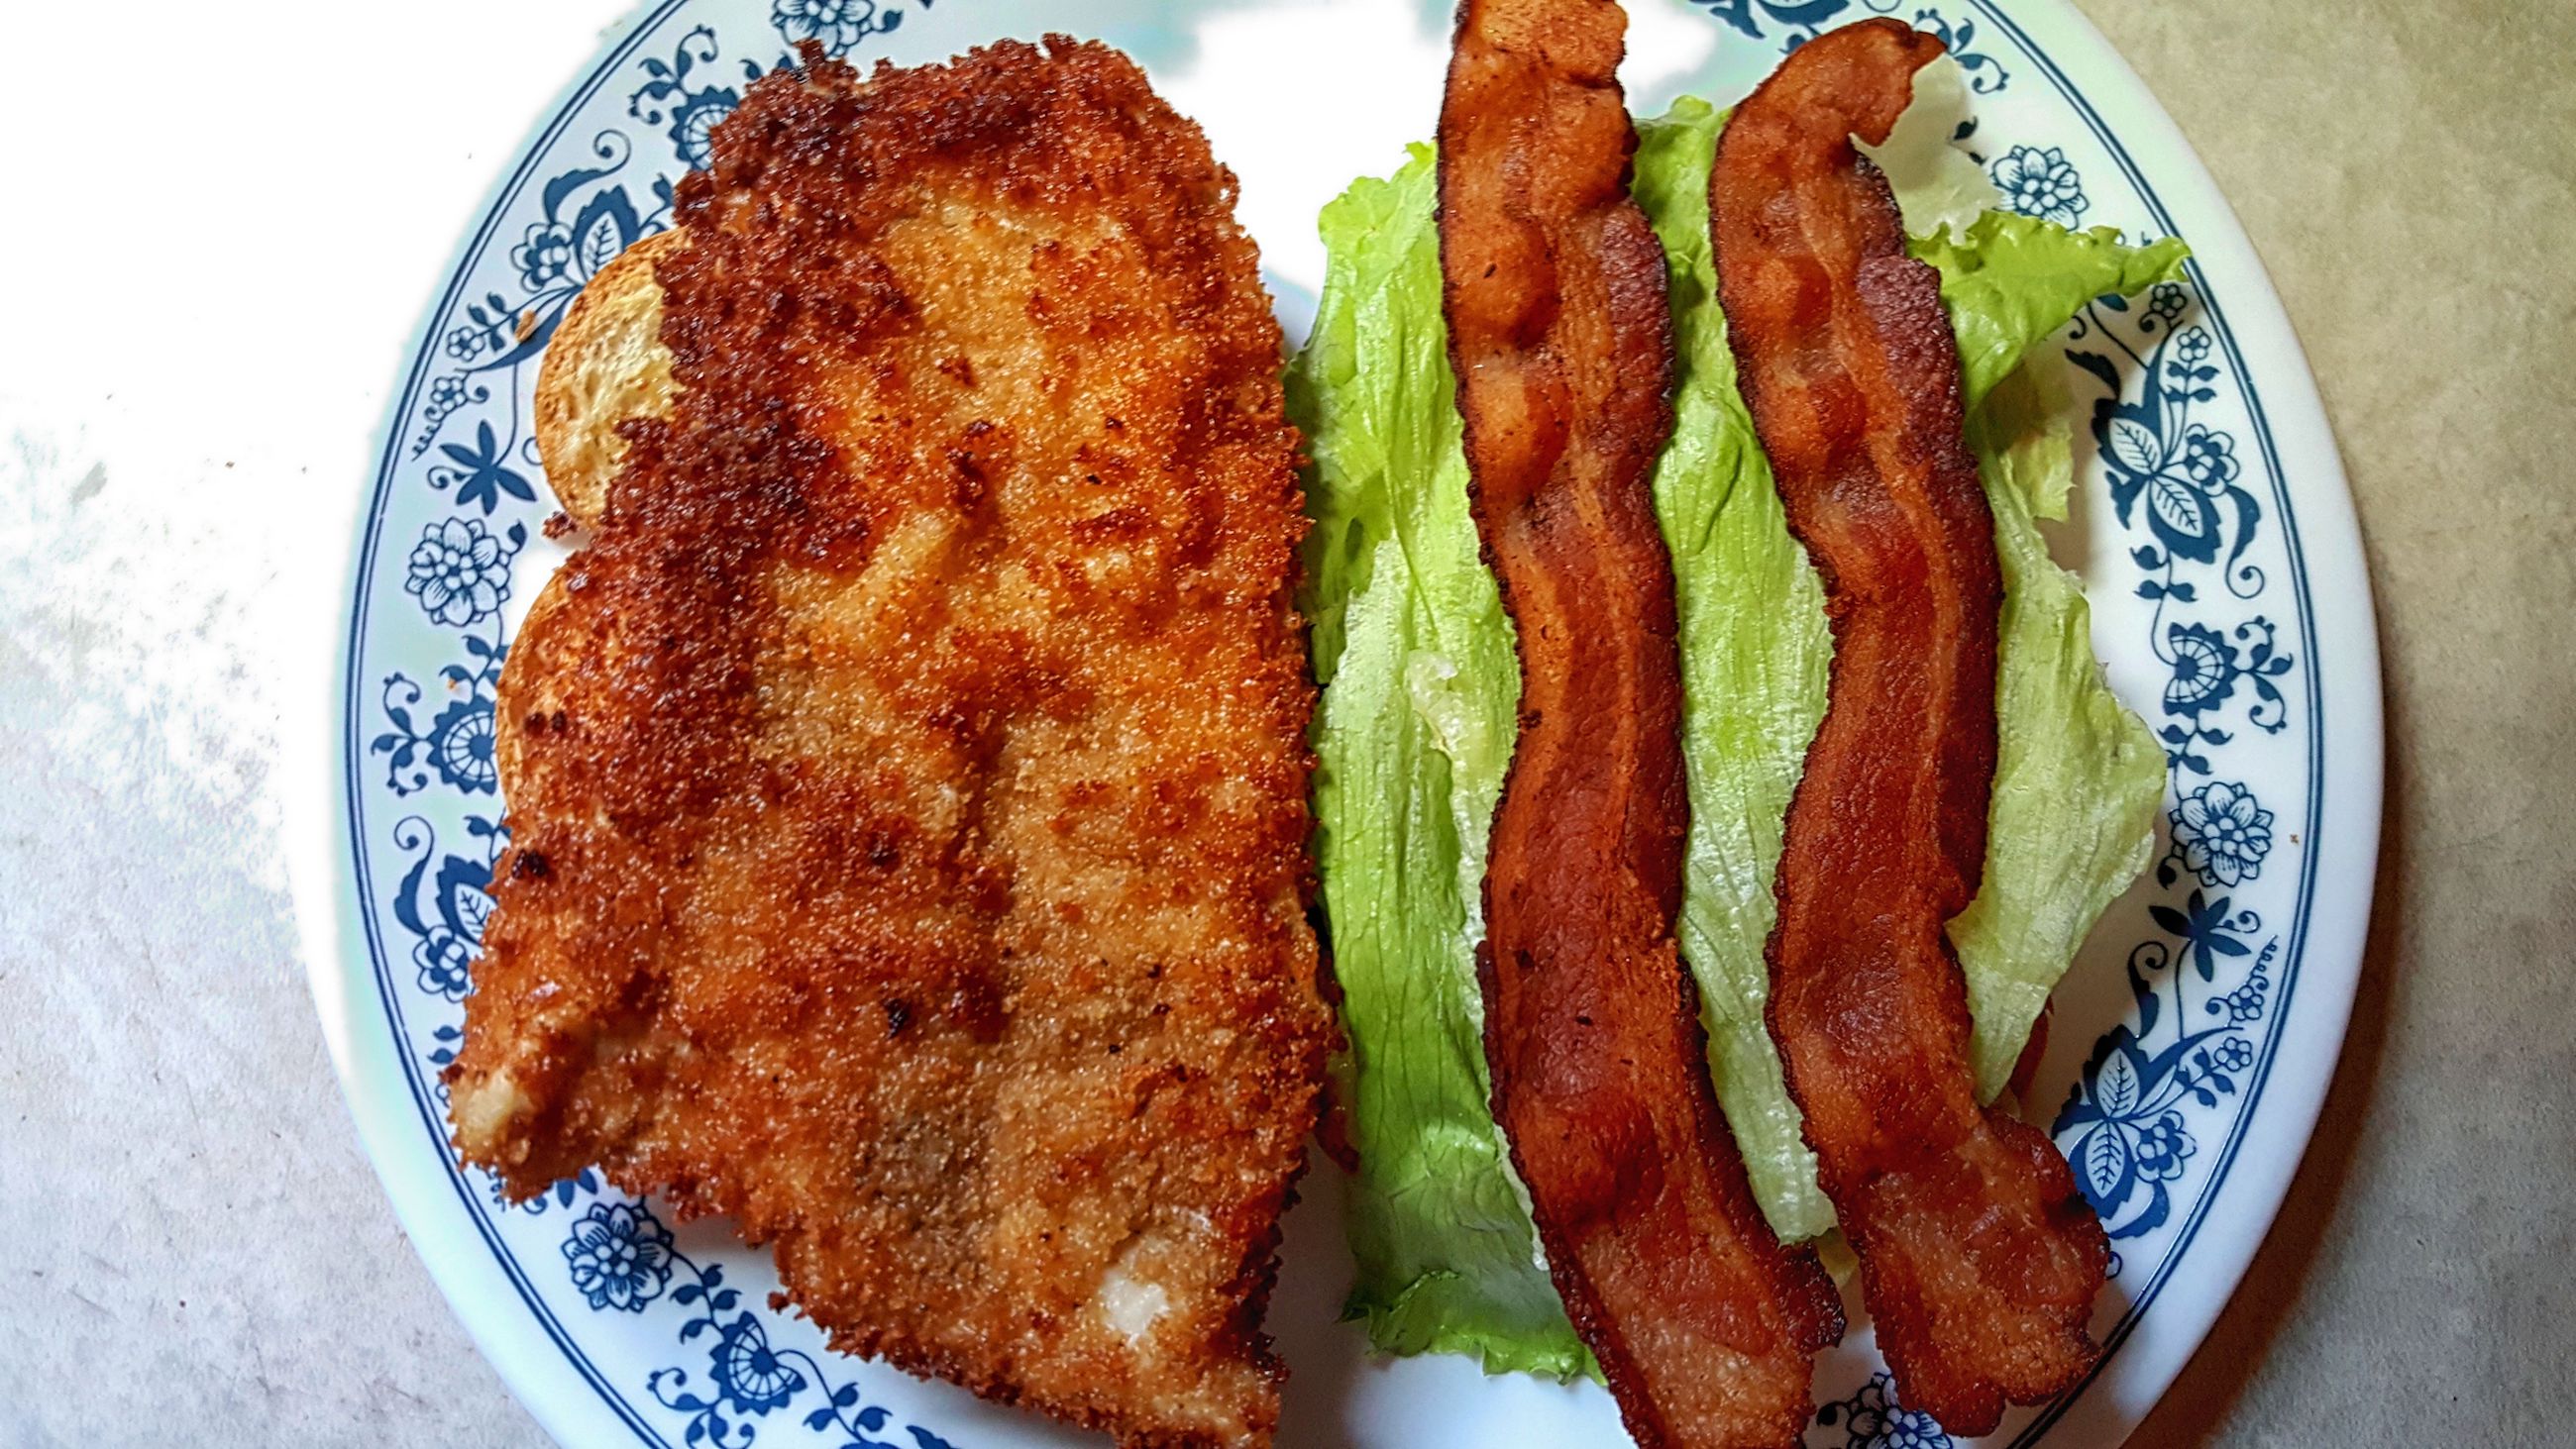 Chicken schnitzel with mayo, lettuce, and bacon